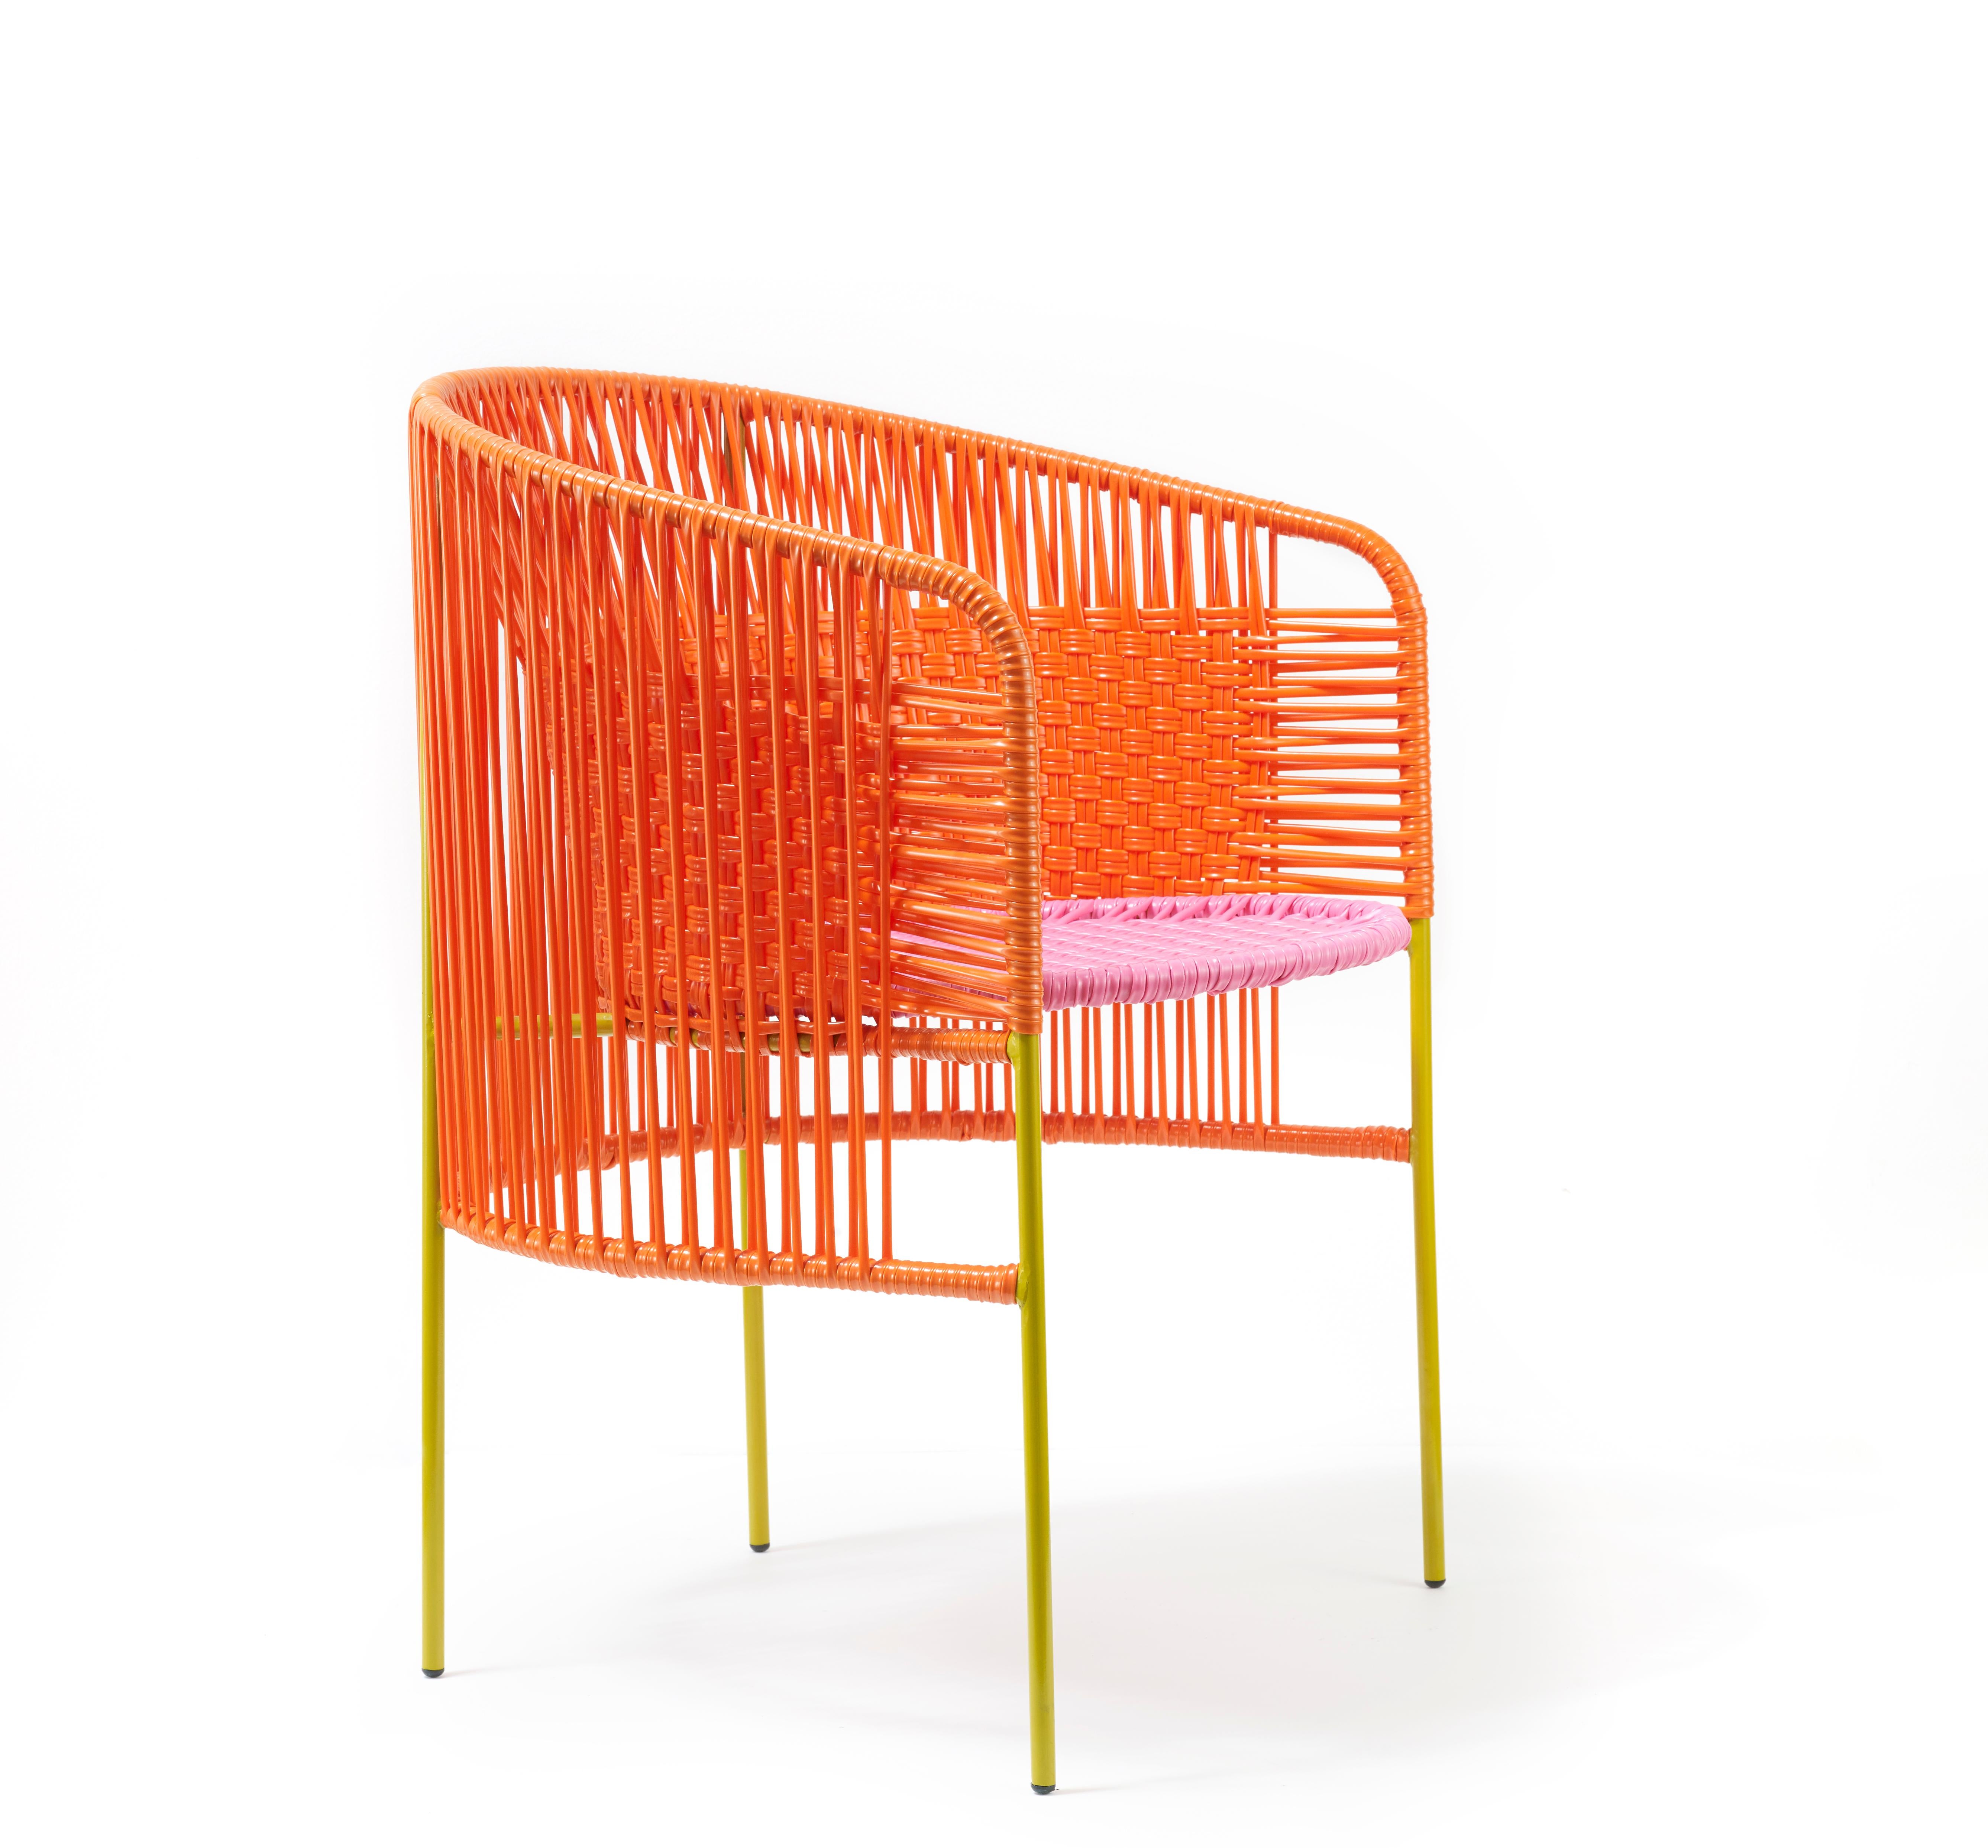 Set of 2 Orange rose caribe dining chair by Sebastian Herkner
Materials: Galvanized and powder-coated tubular steel. PVC strings are made from recycled plastic.
Technique: Made from recycled plastic and weaved by local craftspeople in Colombia.